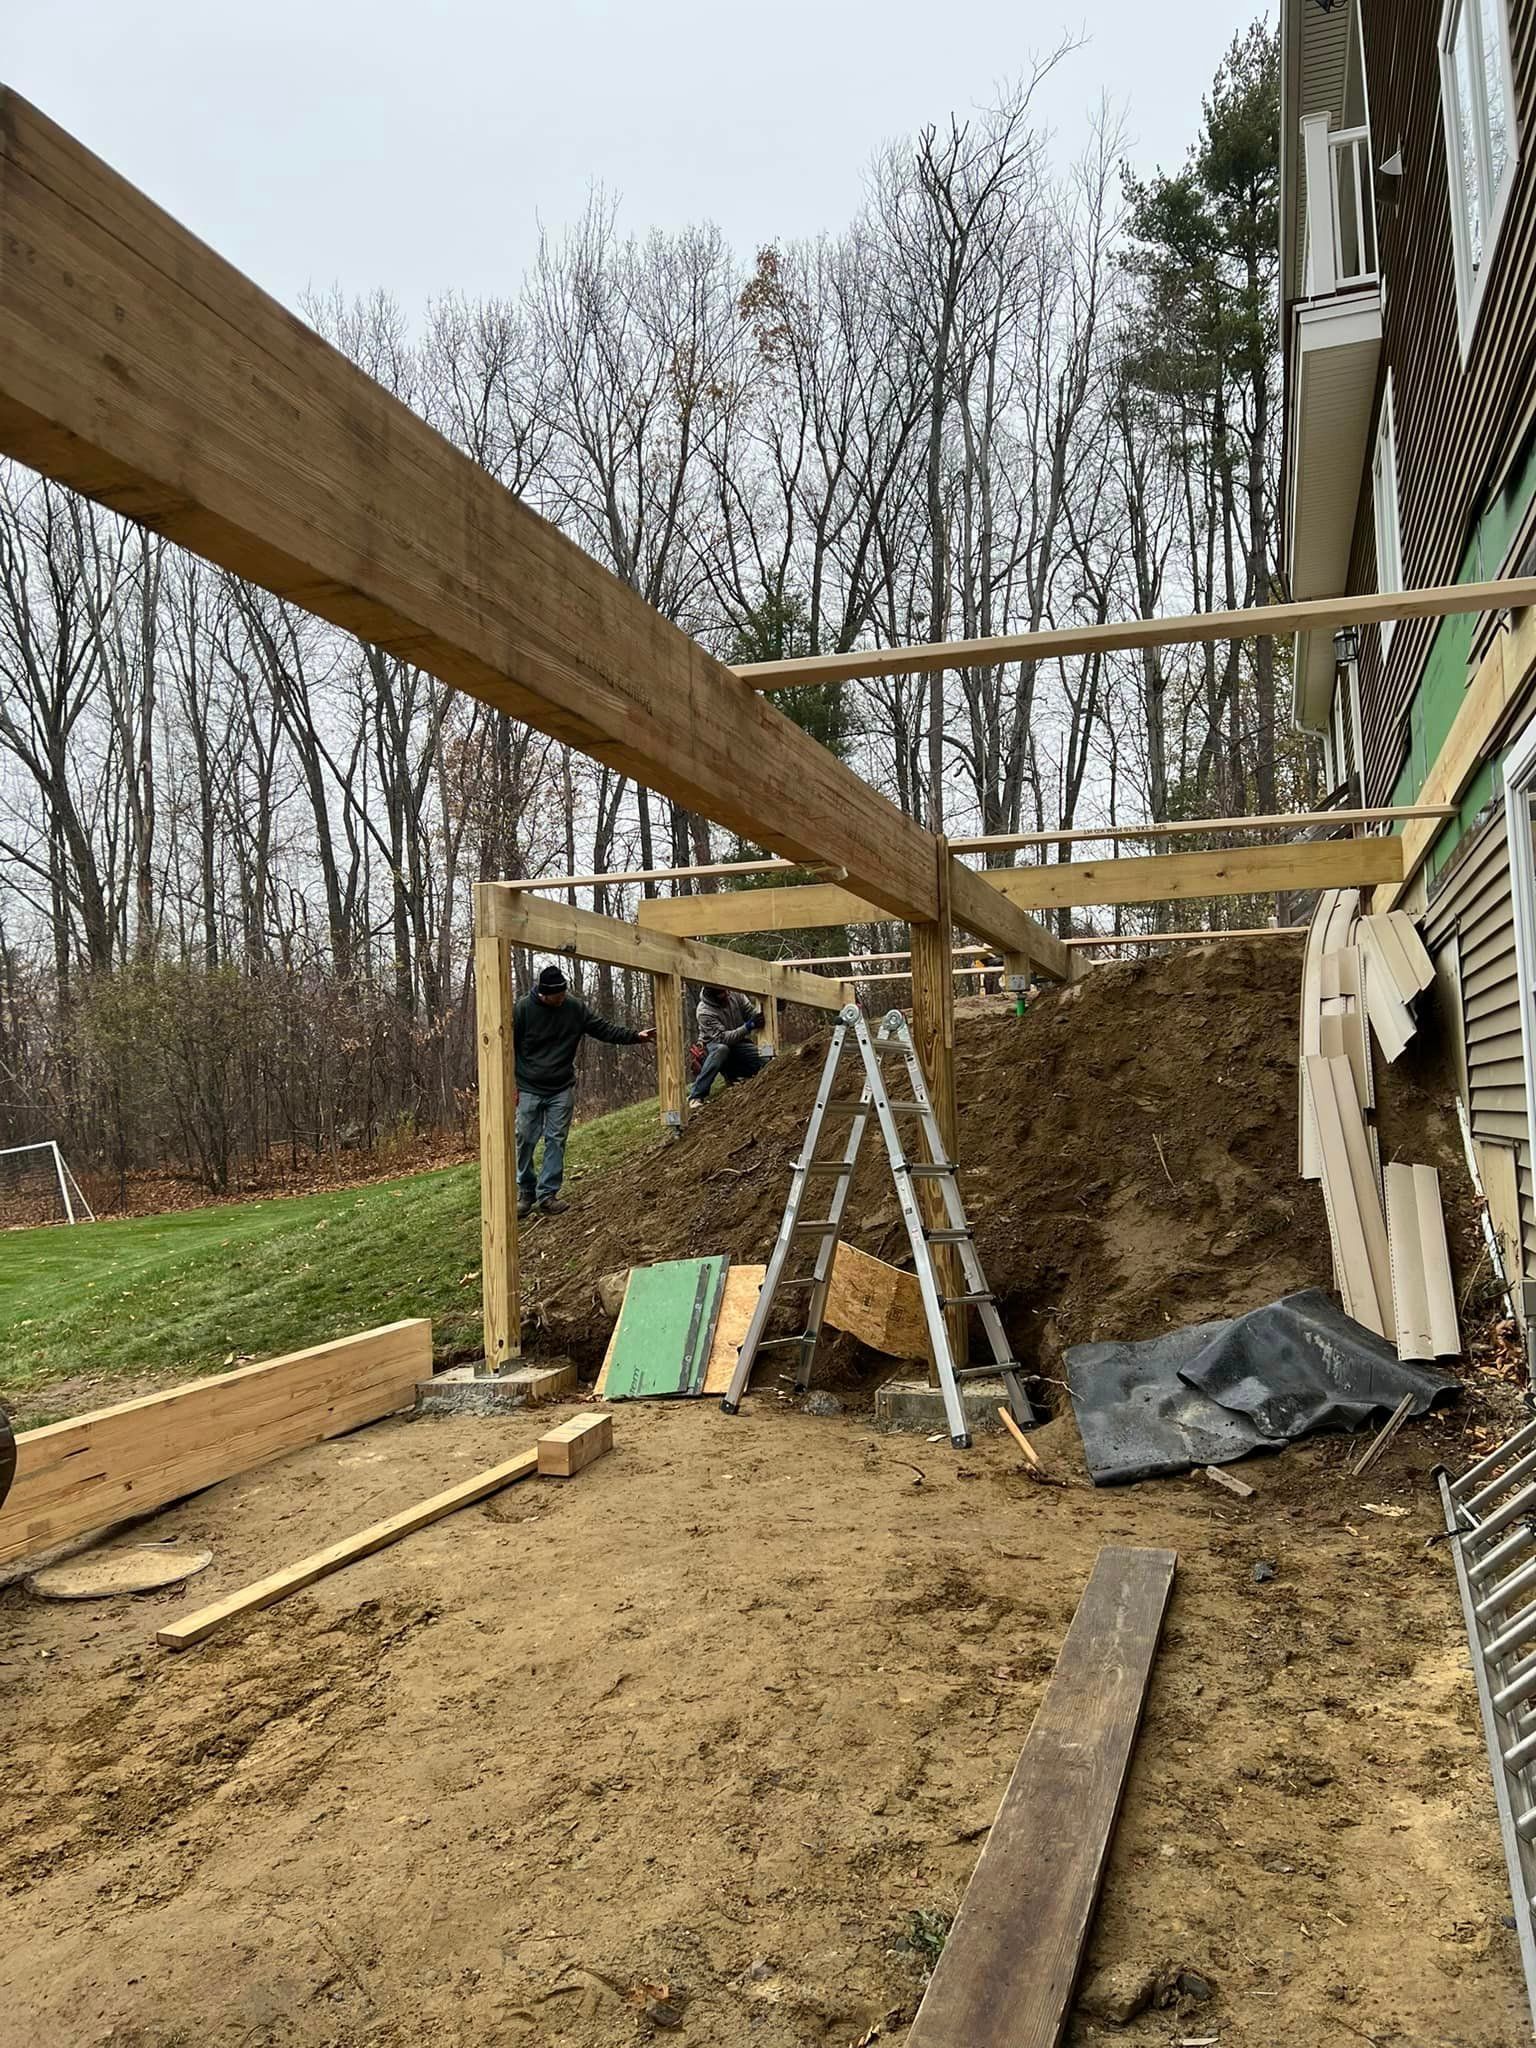 Decks and Exterior Remodeling for All Around Roofing And Construction in Townsend, MA